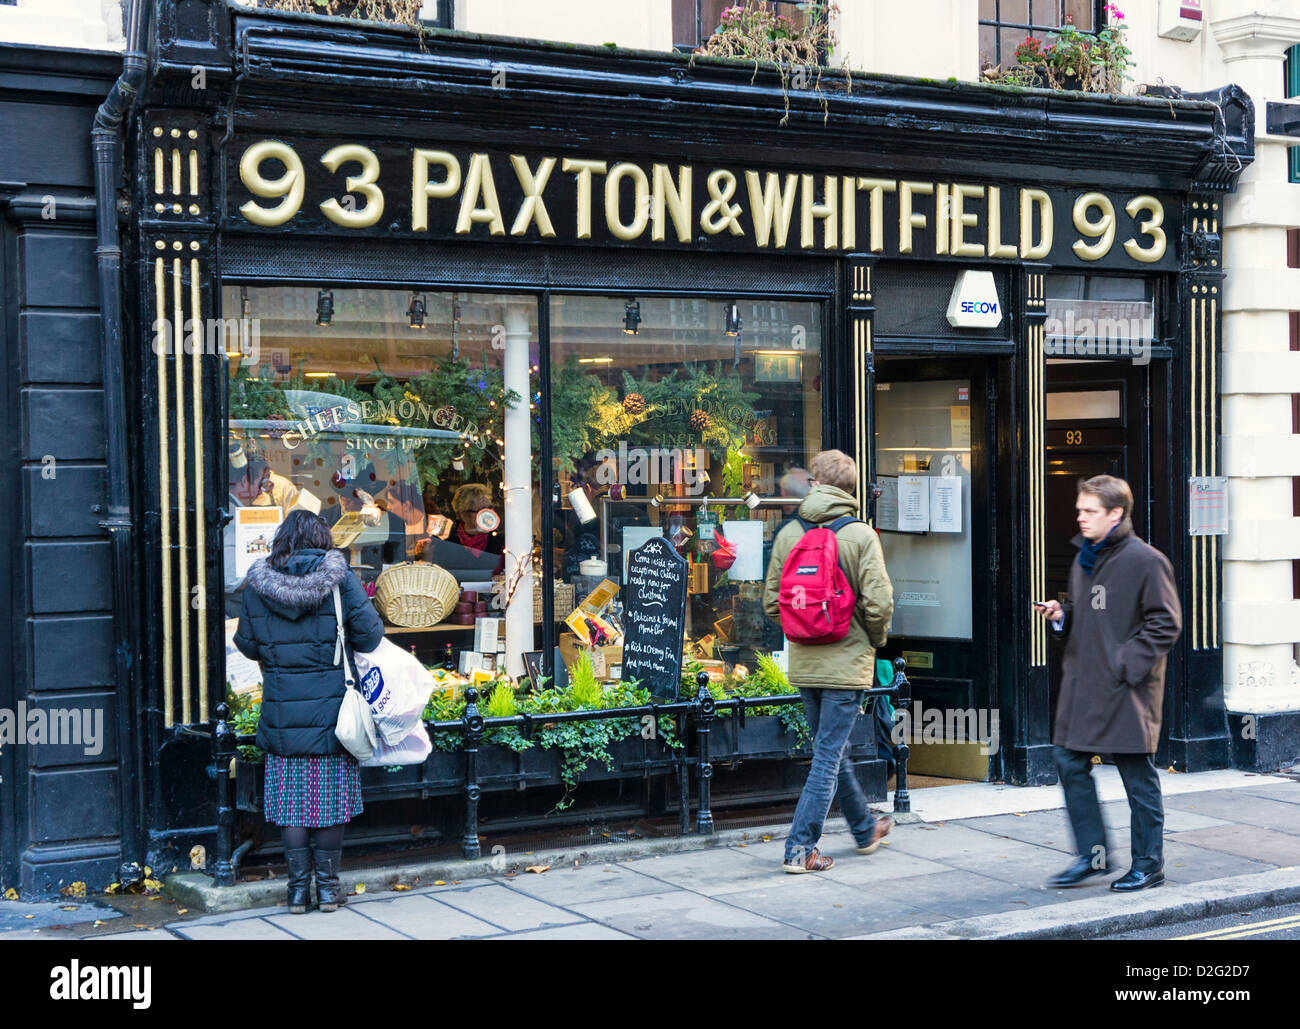 Paxton and Whitfield cheese shop on Jermyn Street, Piccadilly, London, UK Stock Photo